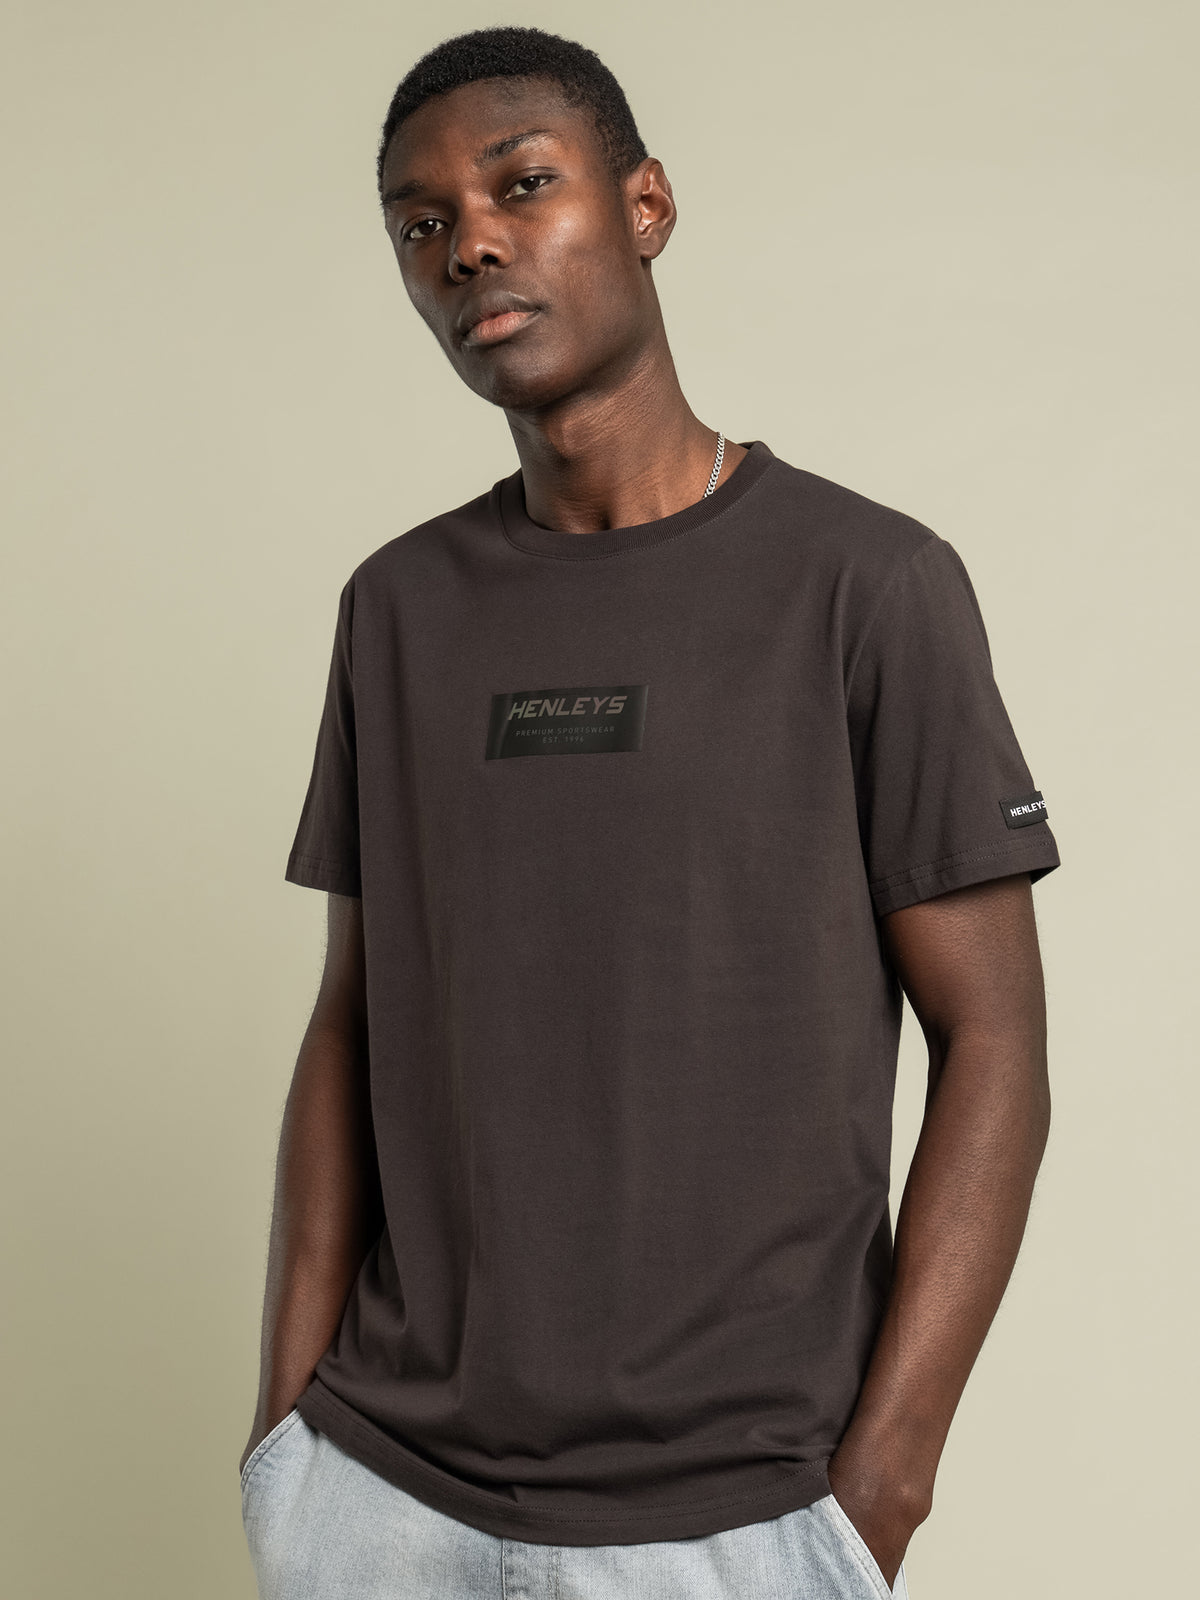 Quiver T-Shirt in Black